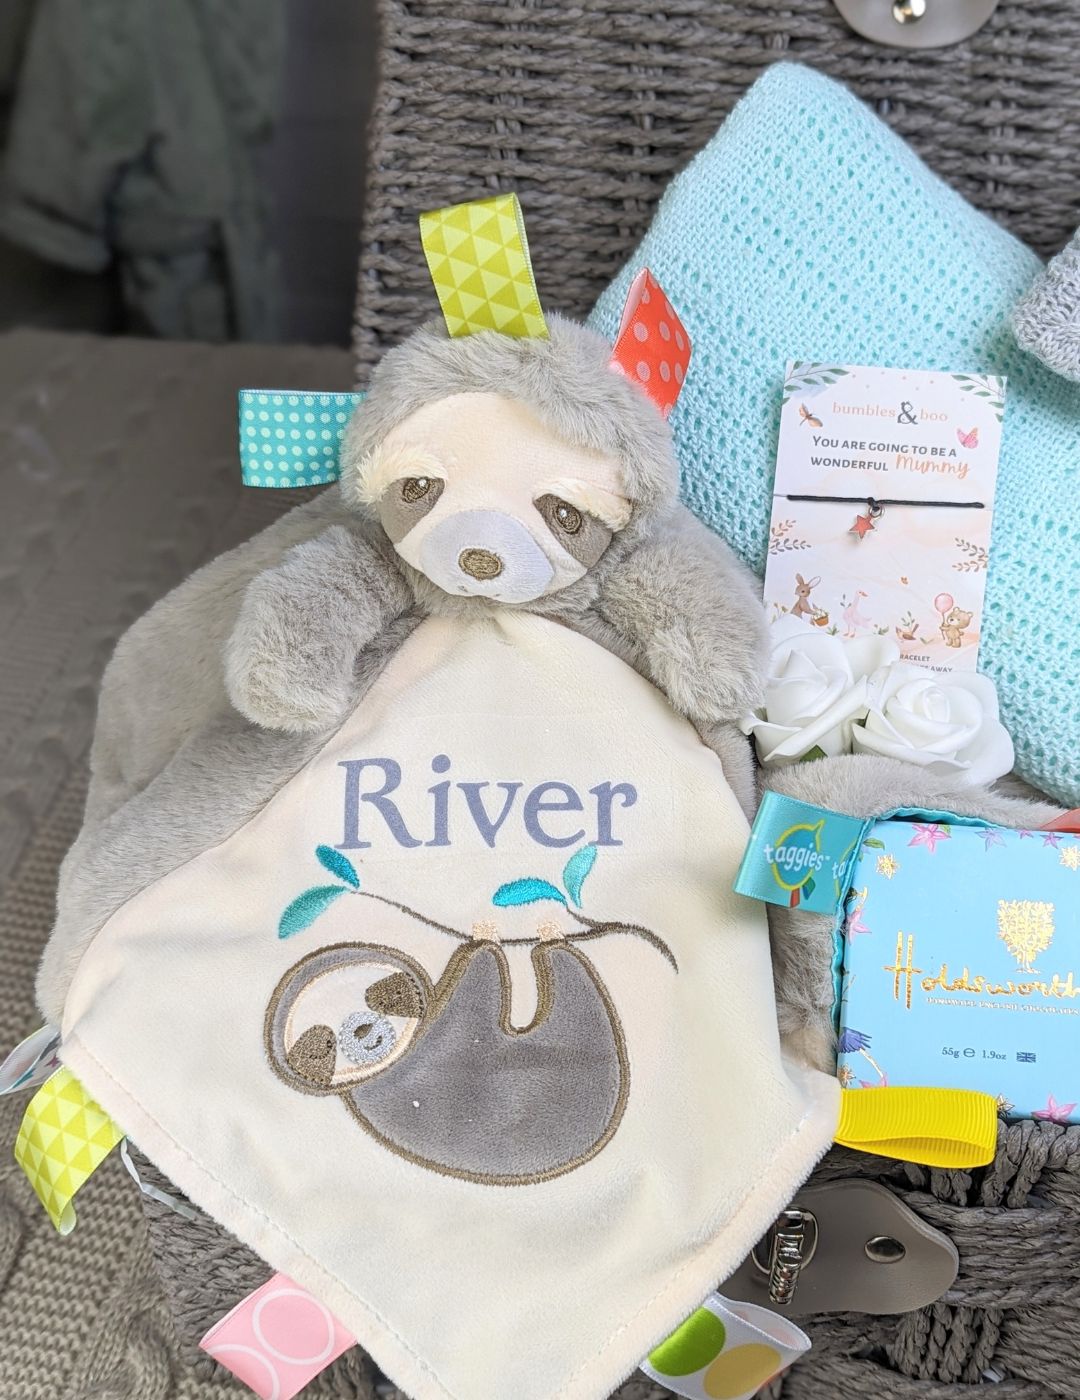 baby boy gifts basket with sloth blankie, mint green blanket, baby wash and treat for the parents.